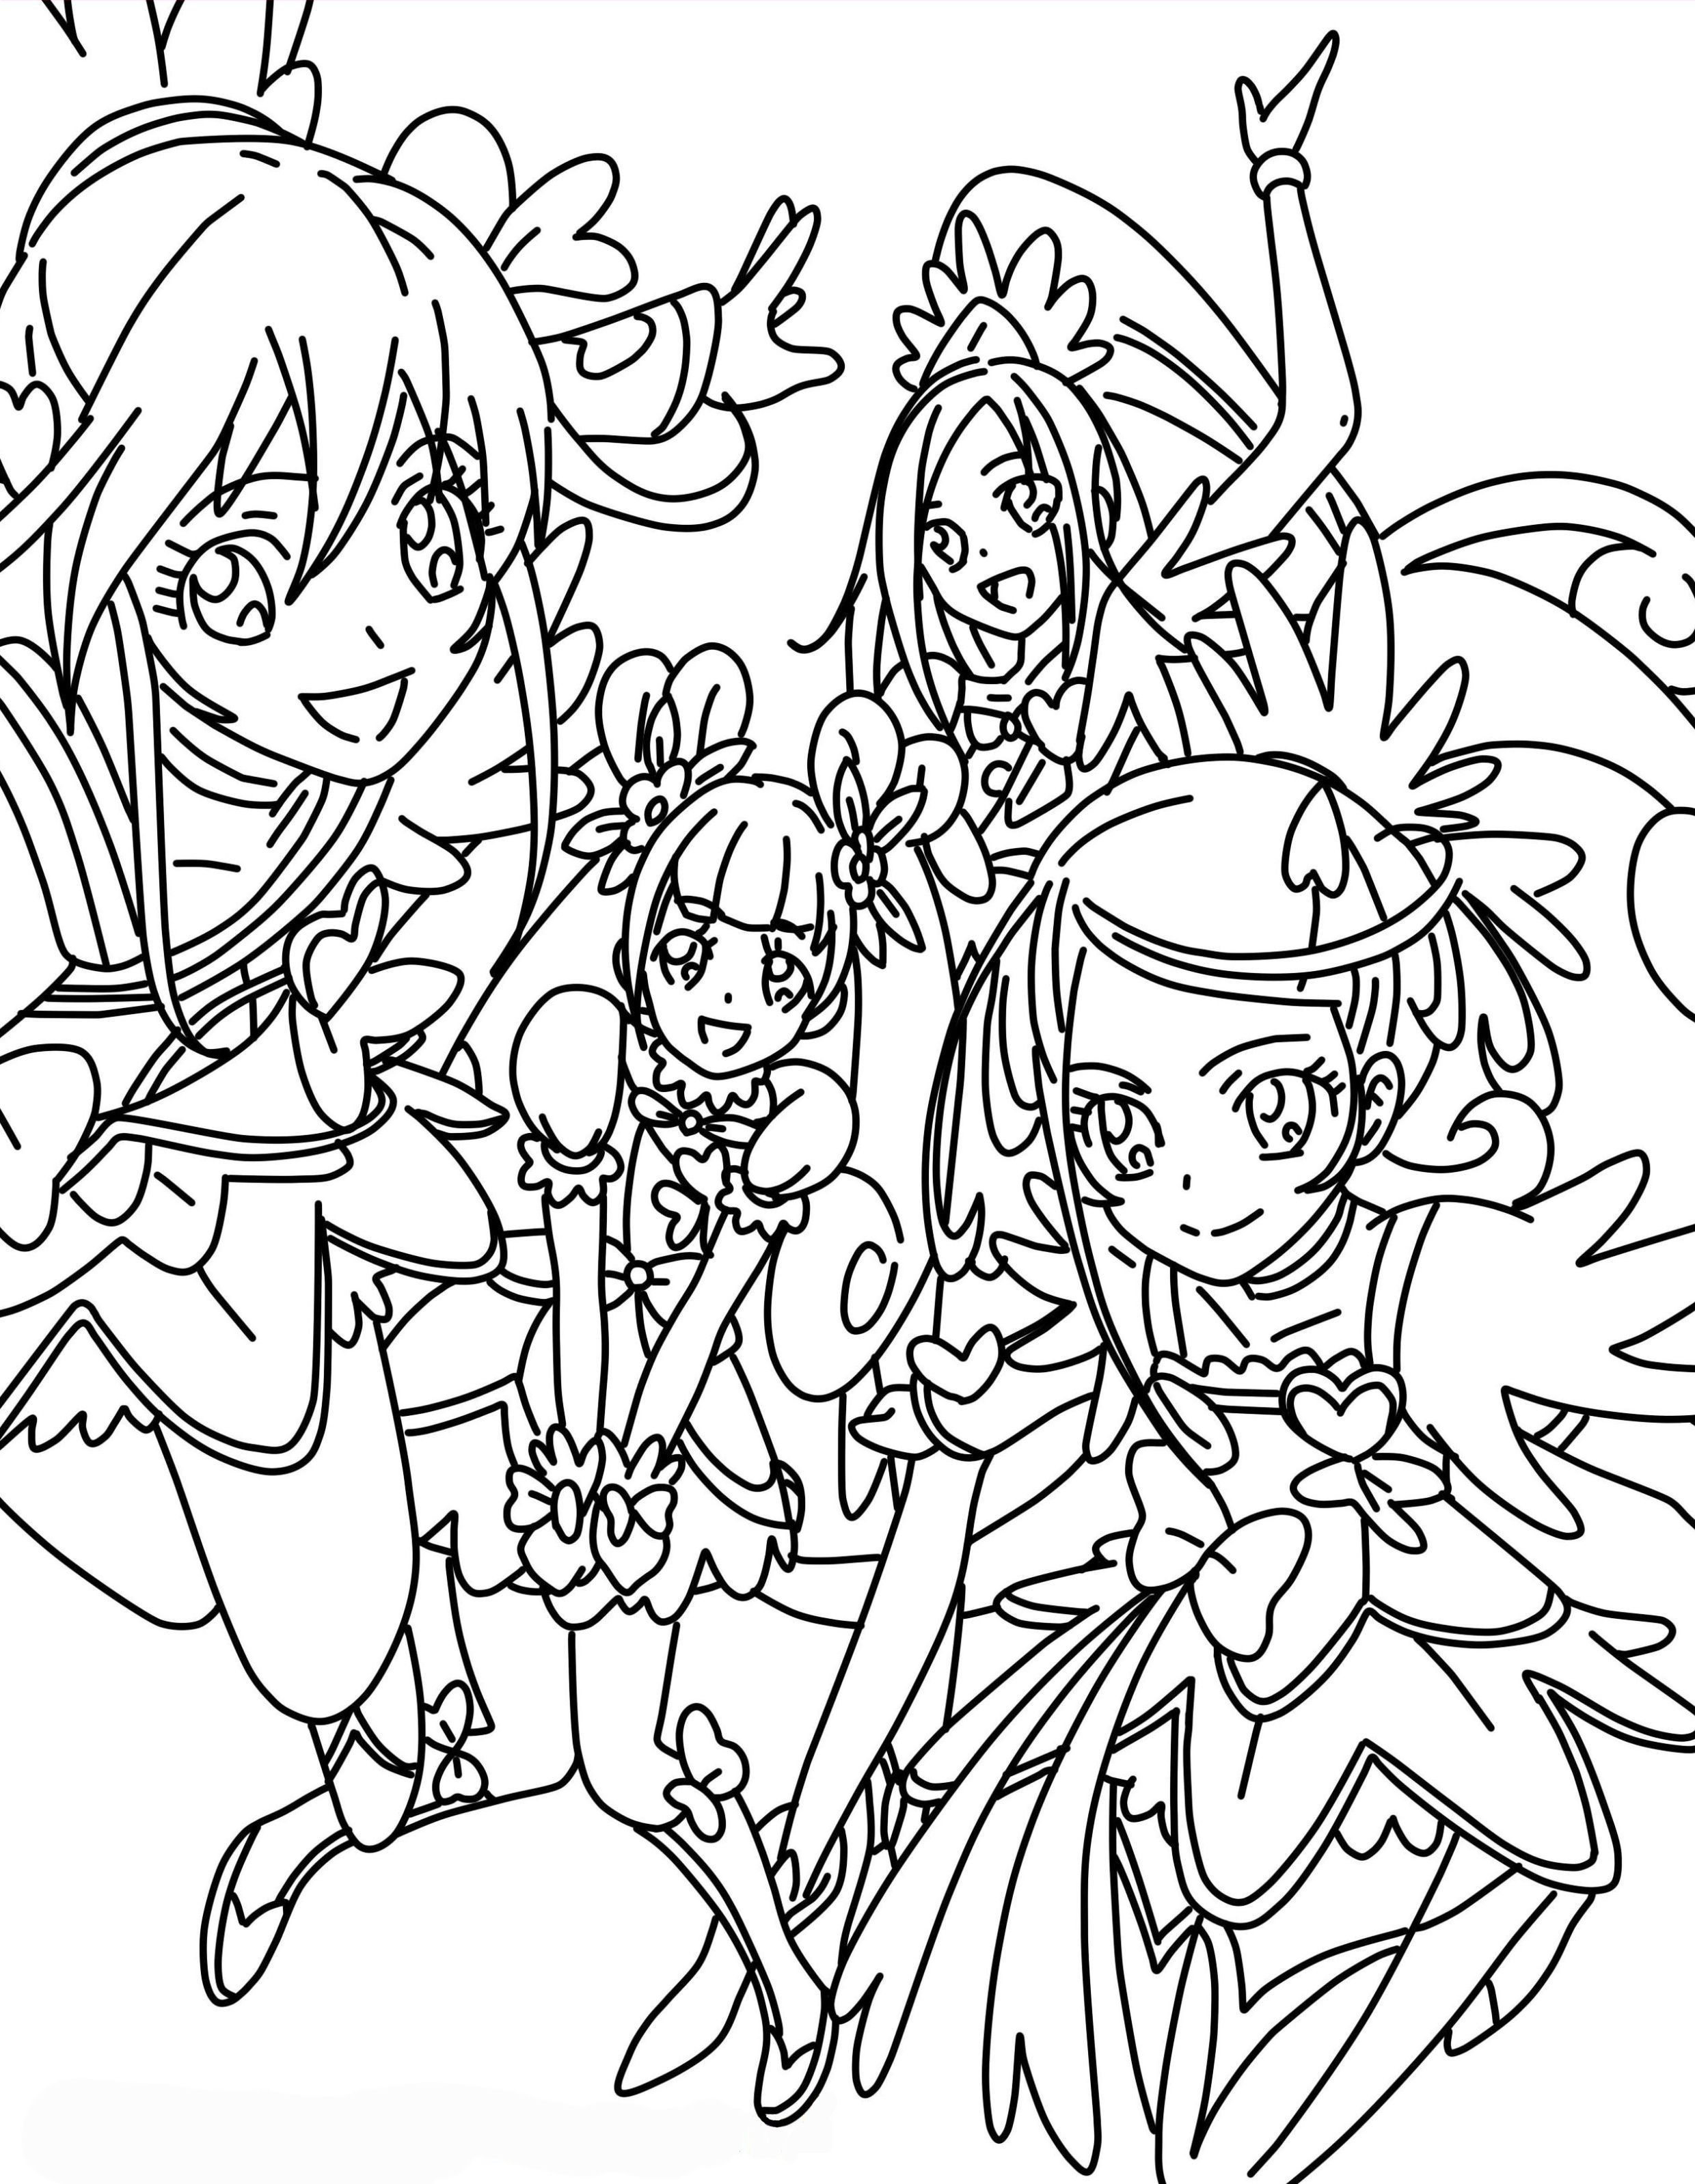 Dokidoki precure coloring pages | Cute coloring pages, Coloring pages, Cute  drawings